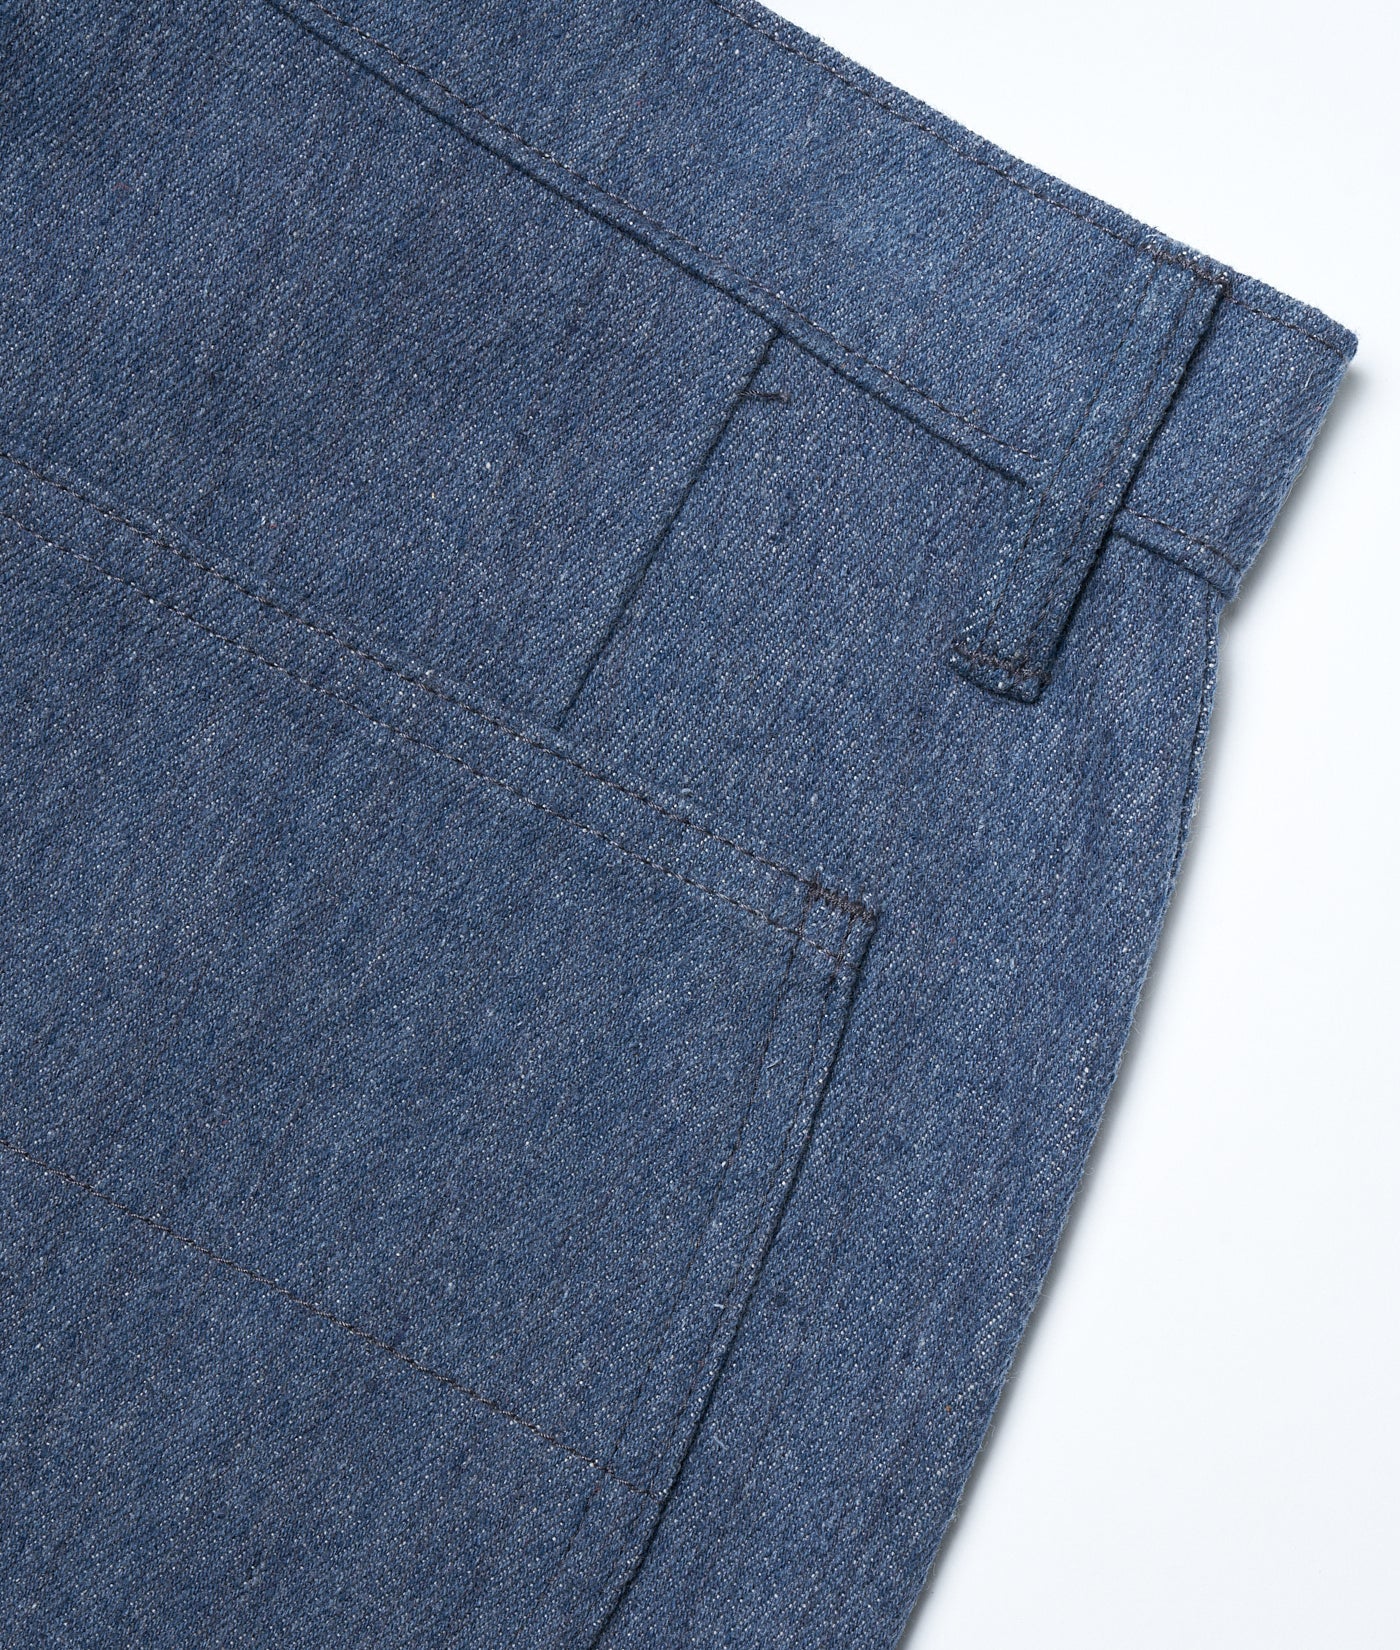 Upcycled Wide Leg Denim | Industry of All Nations